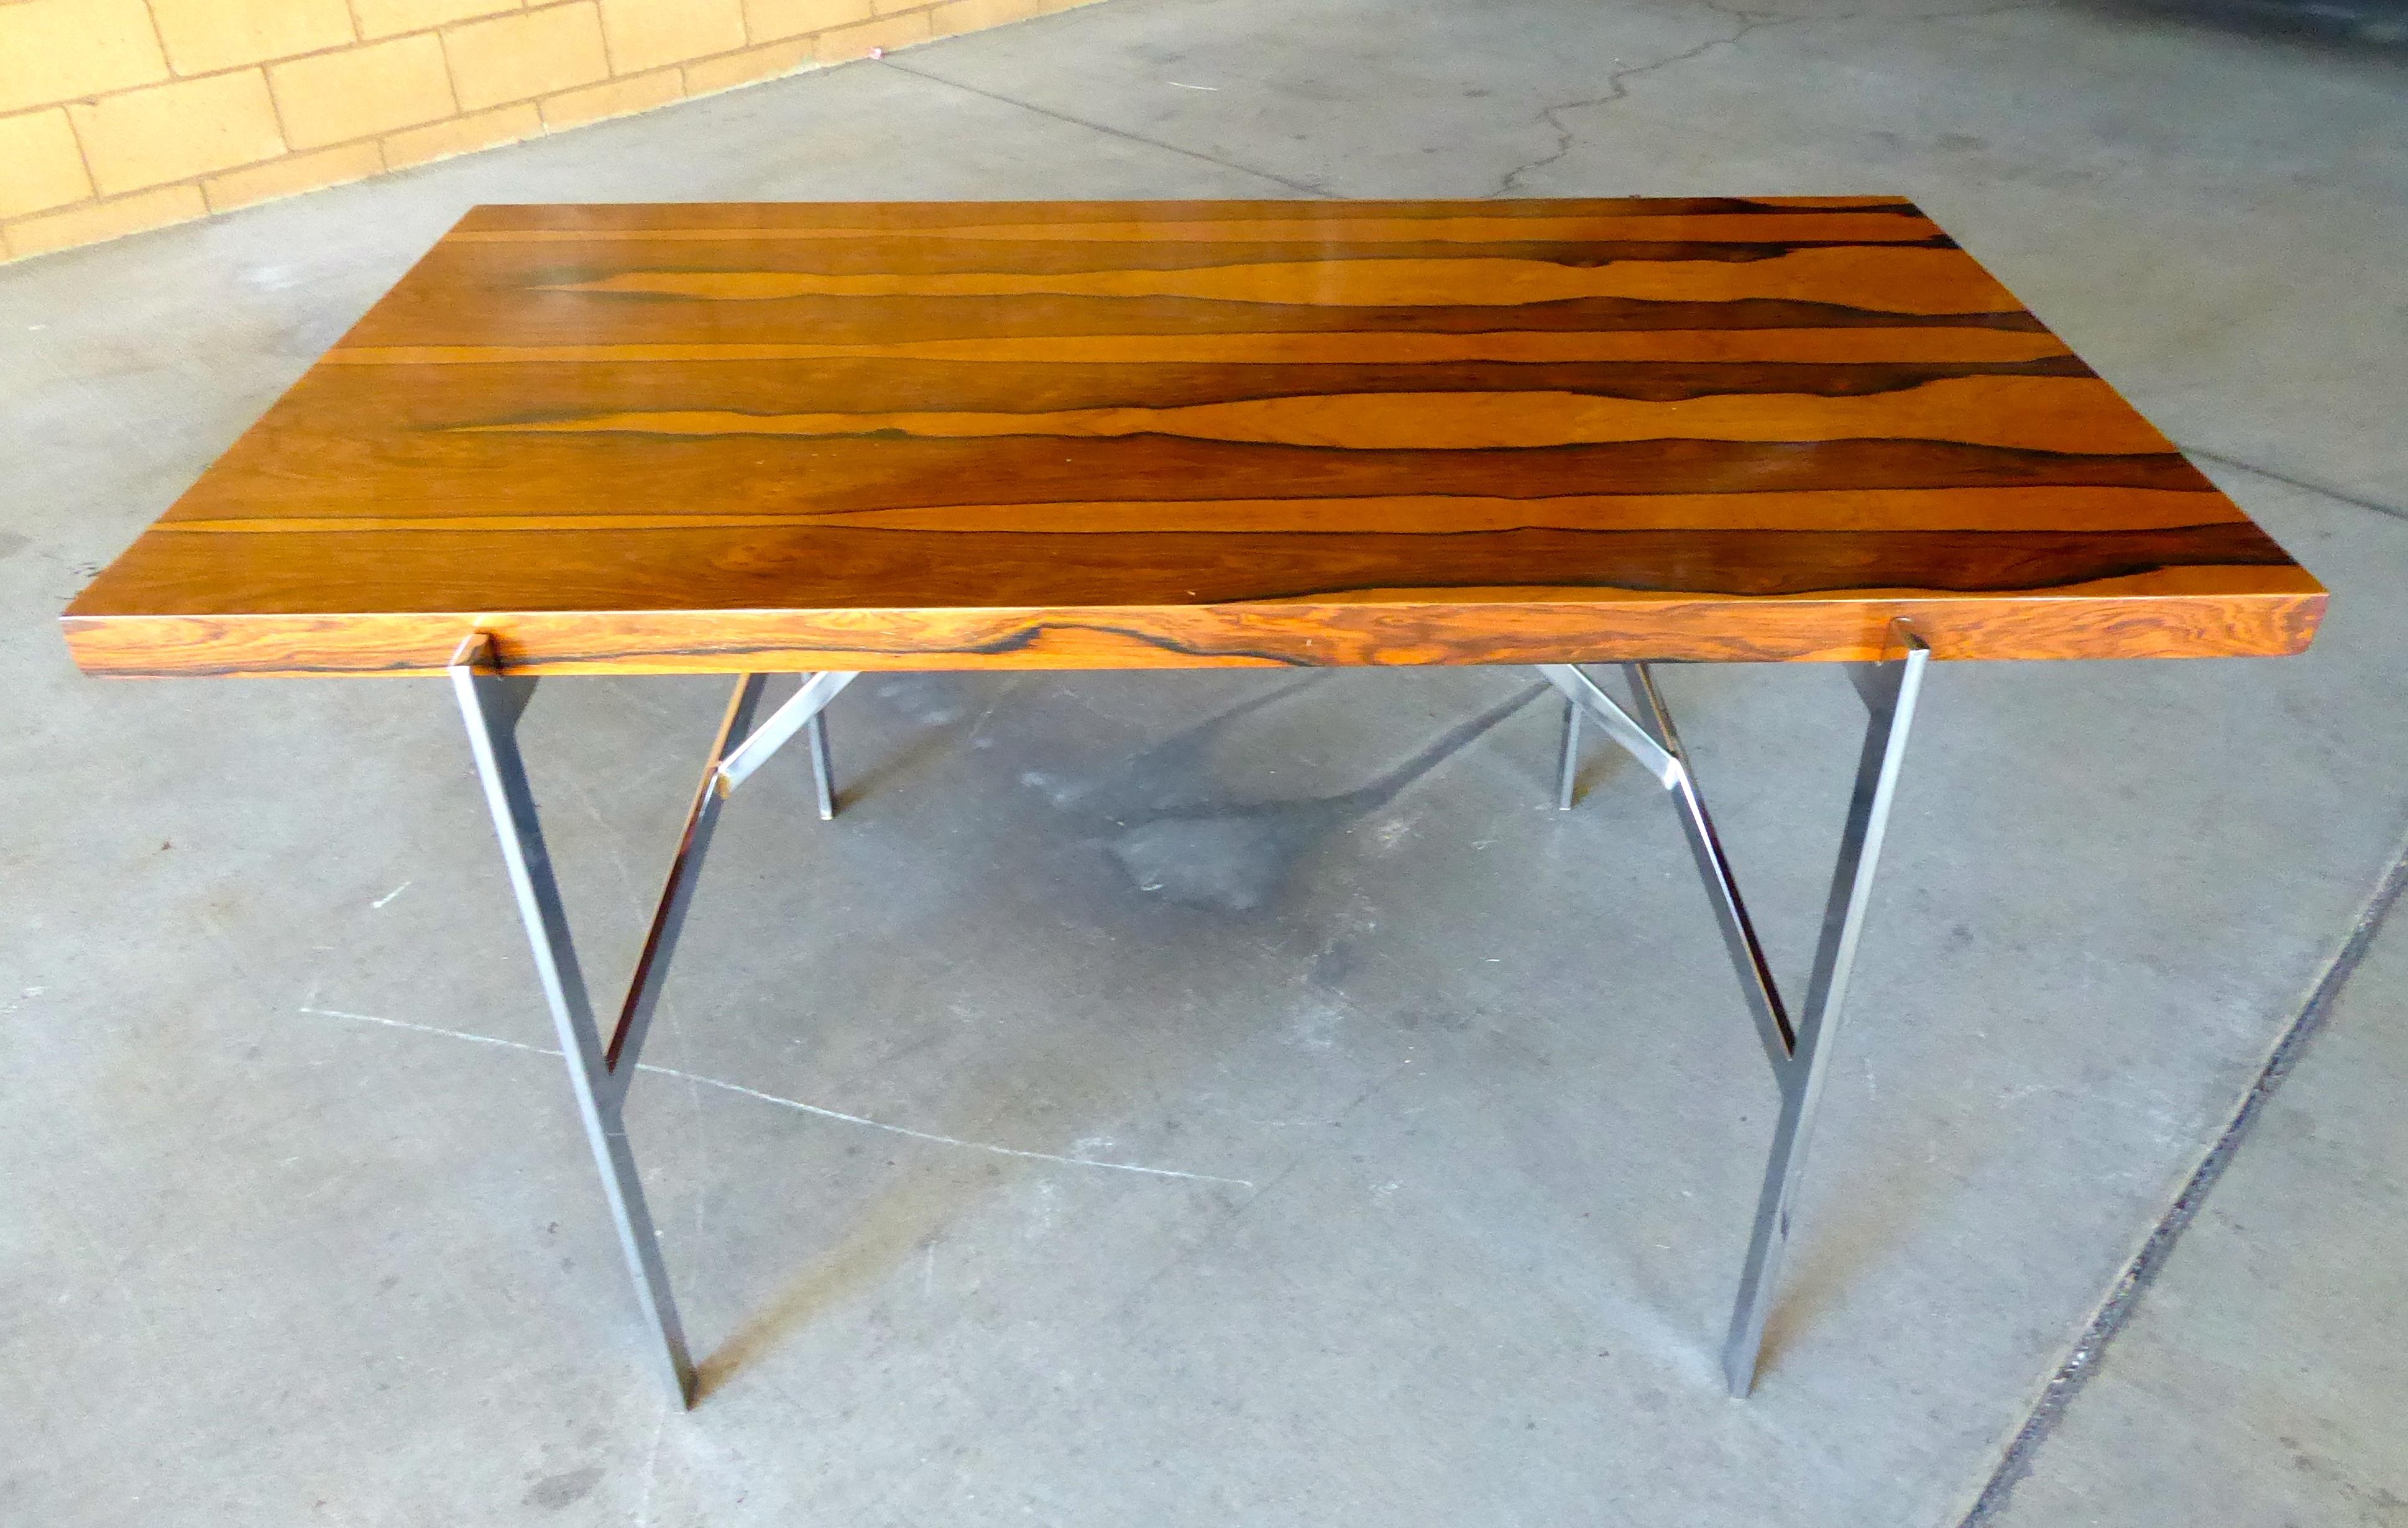 A figured rosewood and chrome-plated steel writing table designed by Milo Baughman for Thayer Coggin Institutional in the 1960s. This is possibly a rare design, as the institutional side of the Thayer Coggin brand is less well known. The